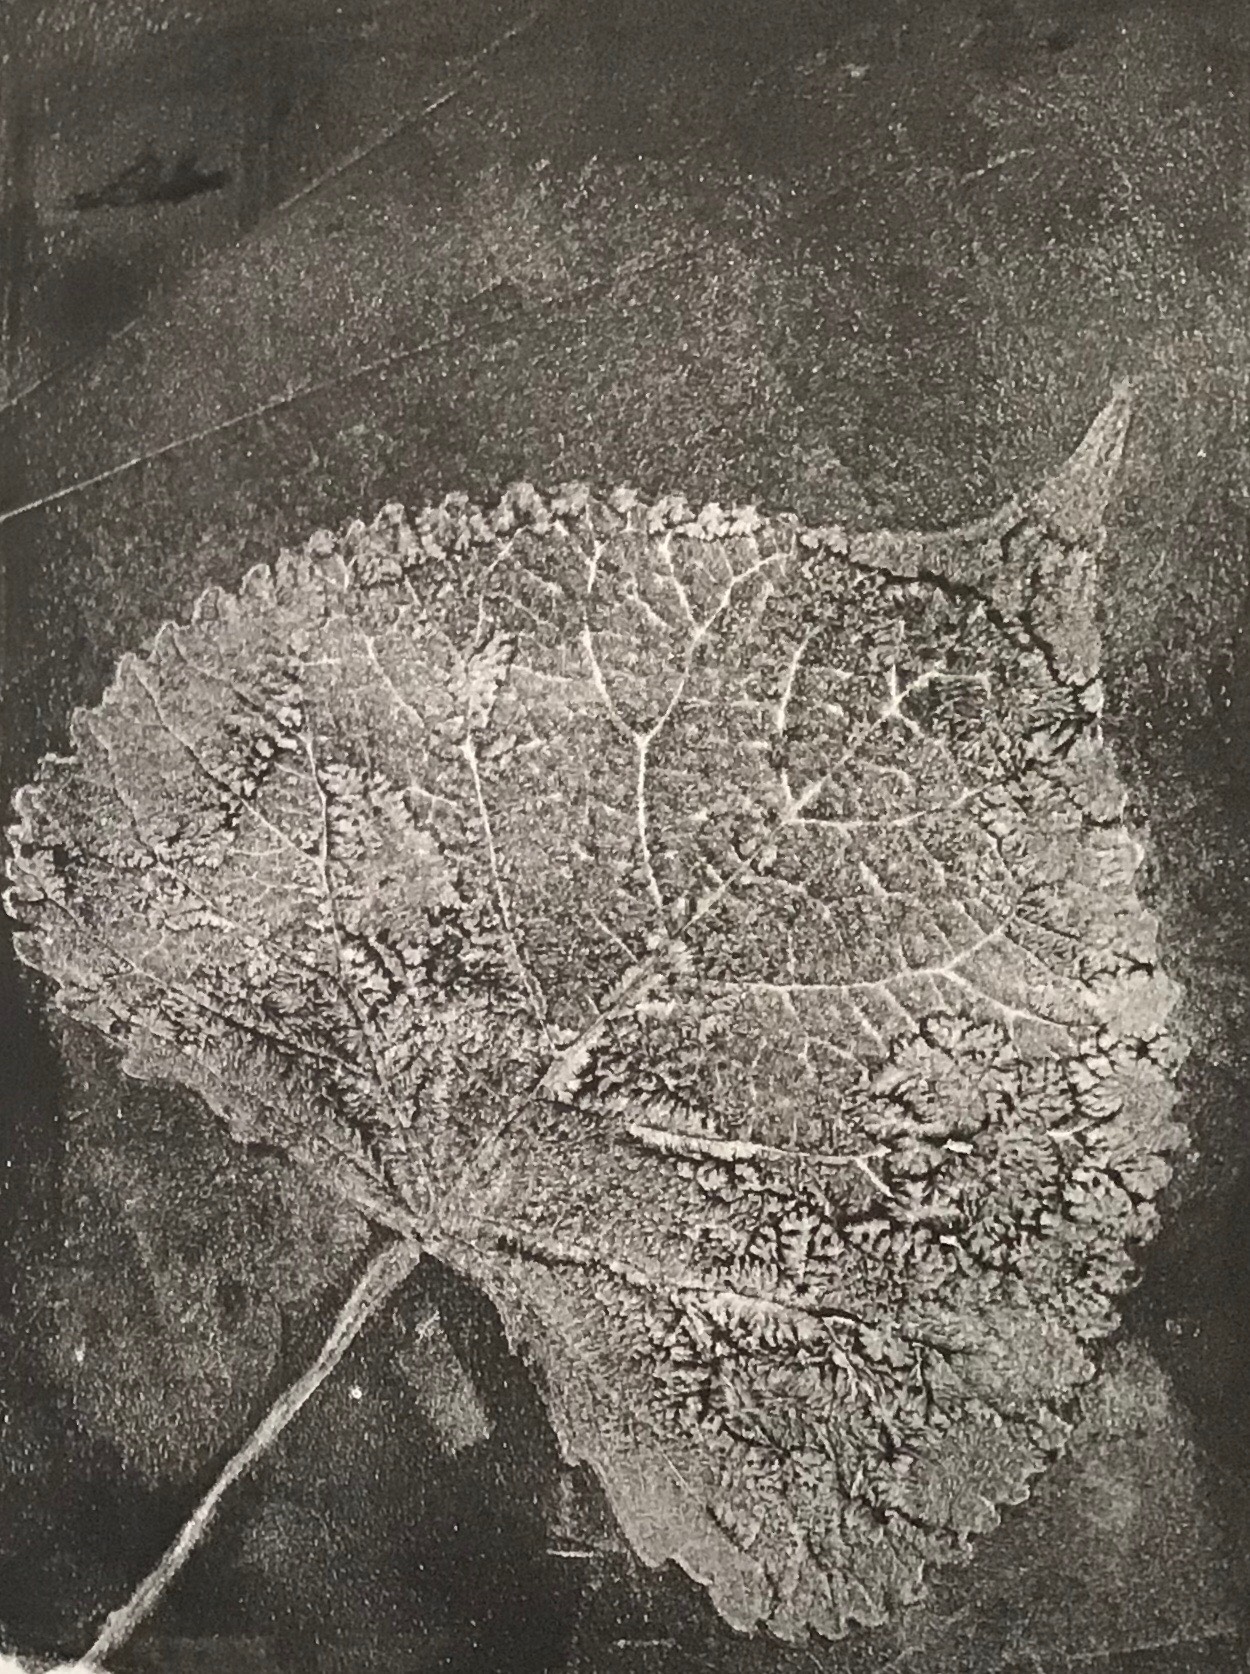 A black and white sketch of a leaf